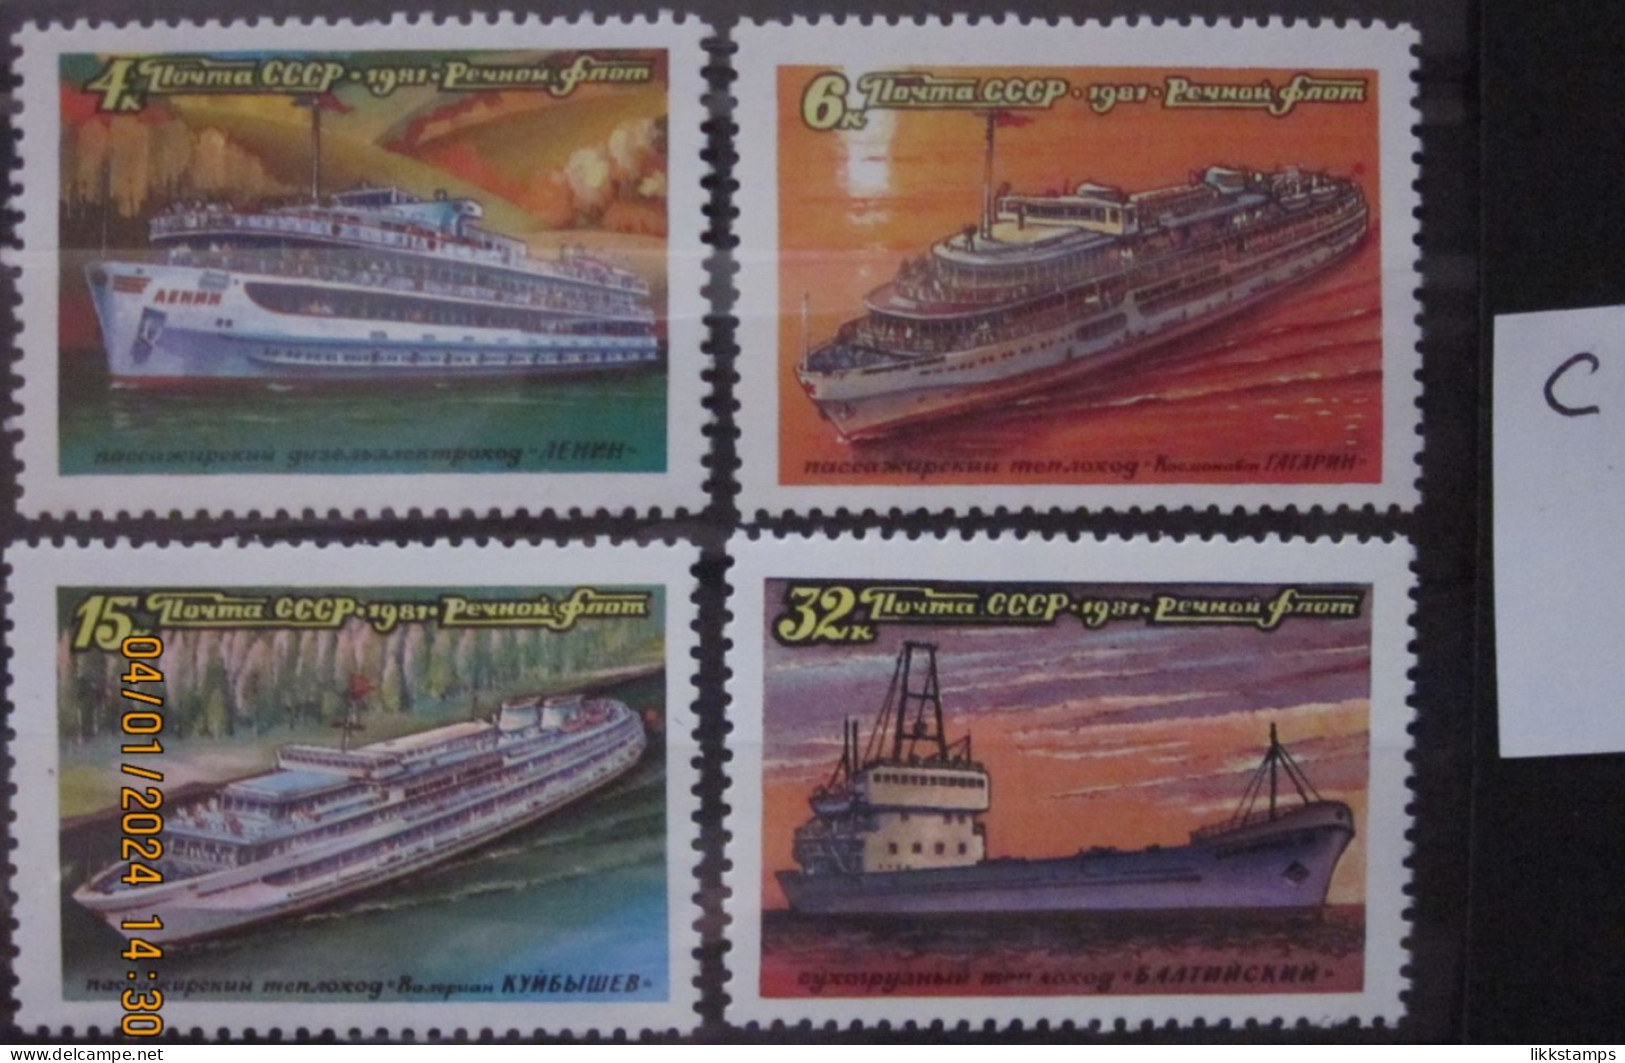 RUSSIA ~ 1981 ~ S.G. NUMBERS 5143 - 5146, ~ 'LOT C' ~ RIVER SHIPS. ~ MNH #03621 - Ungebraucht